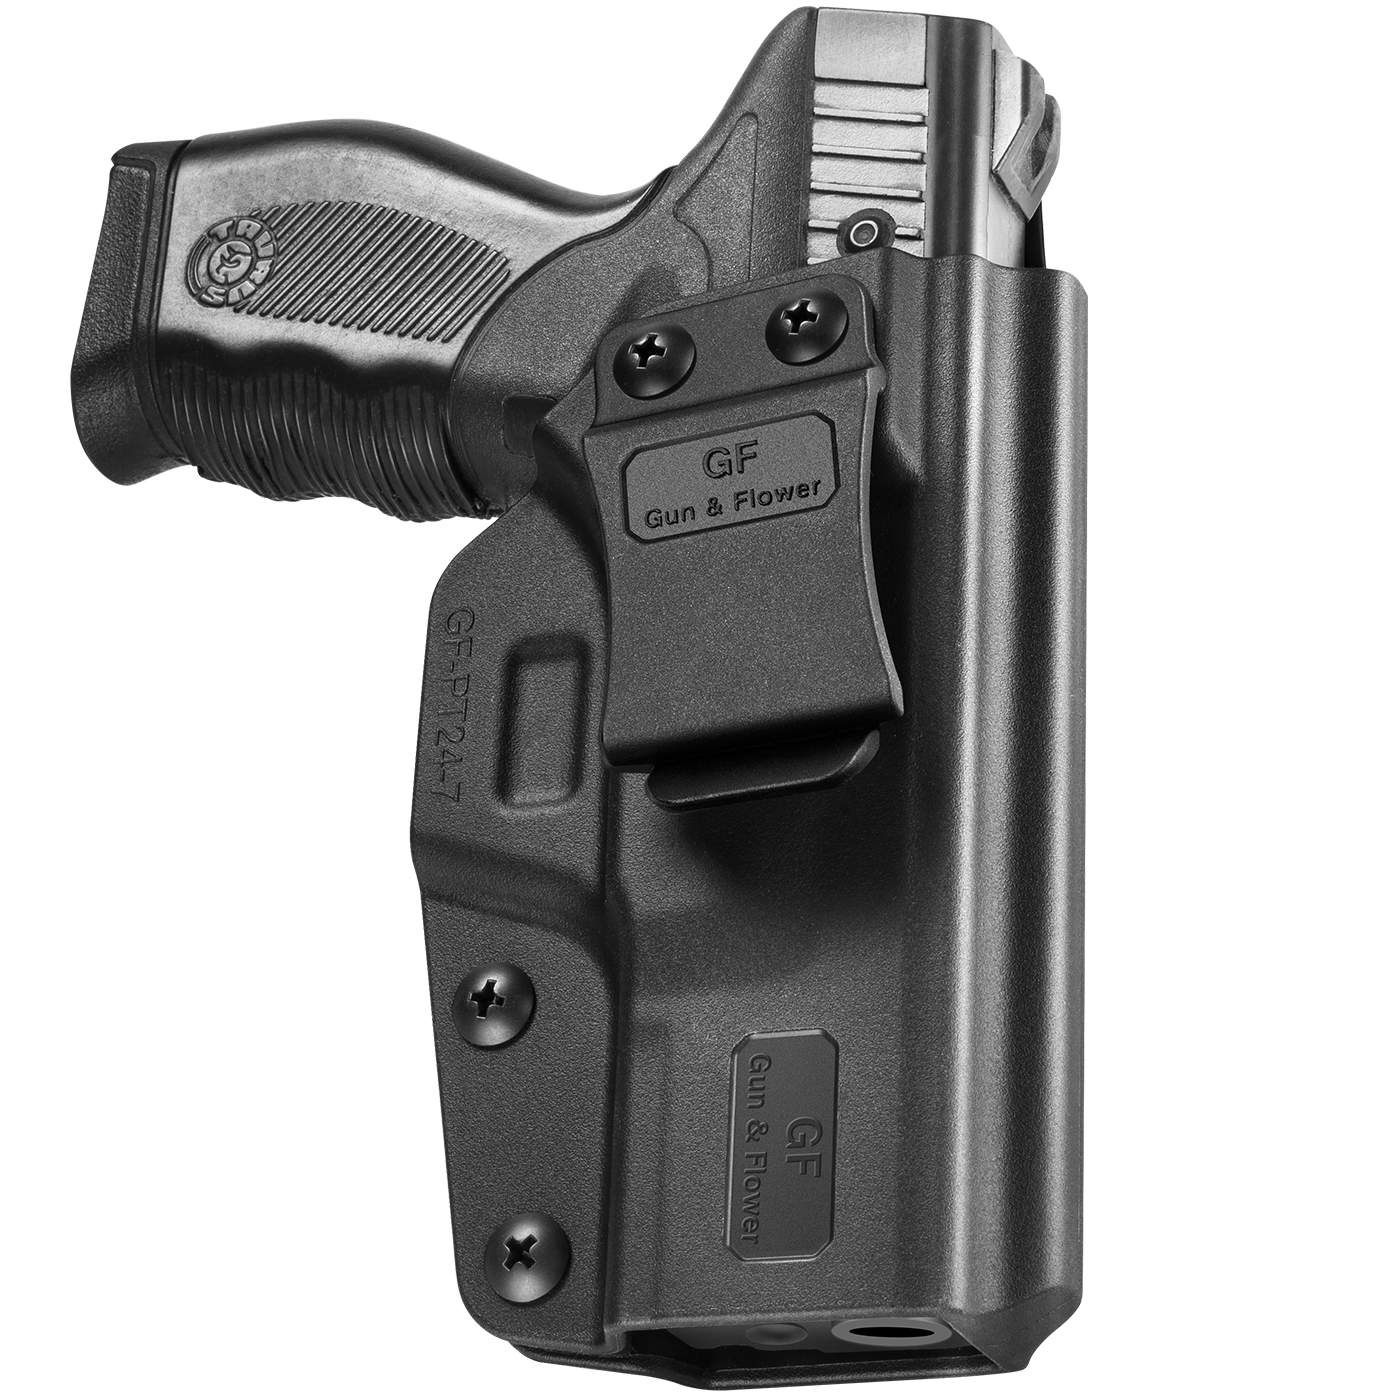 Taurus G3 Holster Polymer And Kydex Iwb For Concealed Carry Holster For G3 Taurus Adj Cant